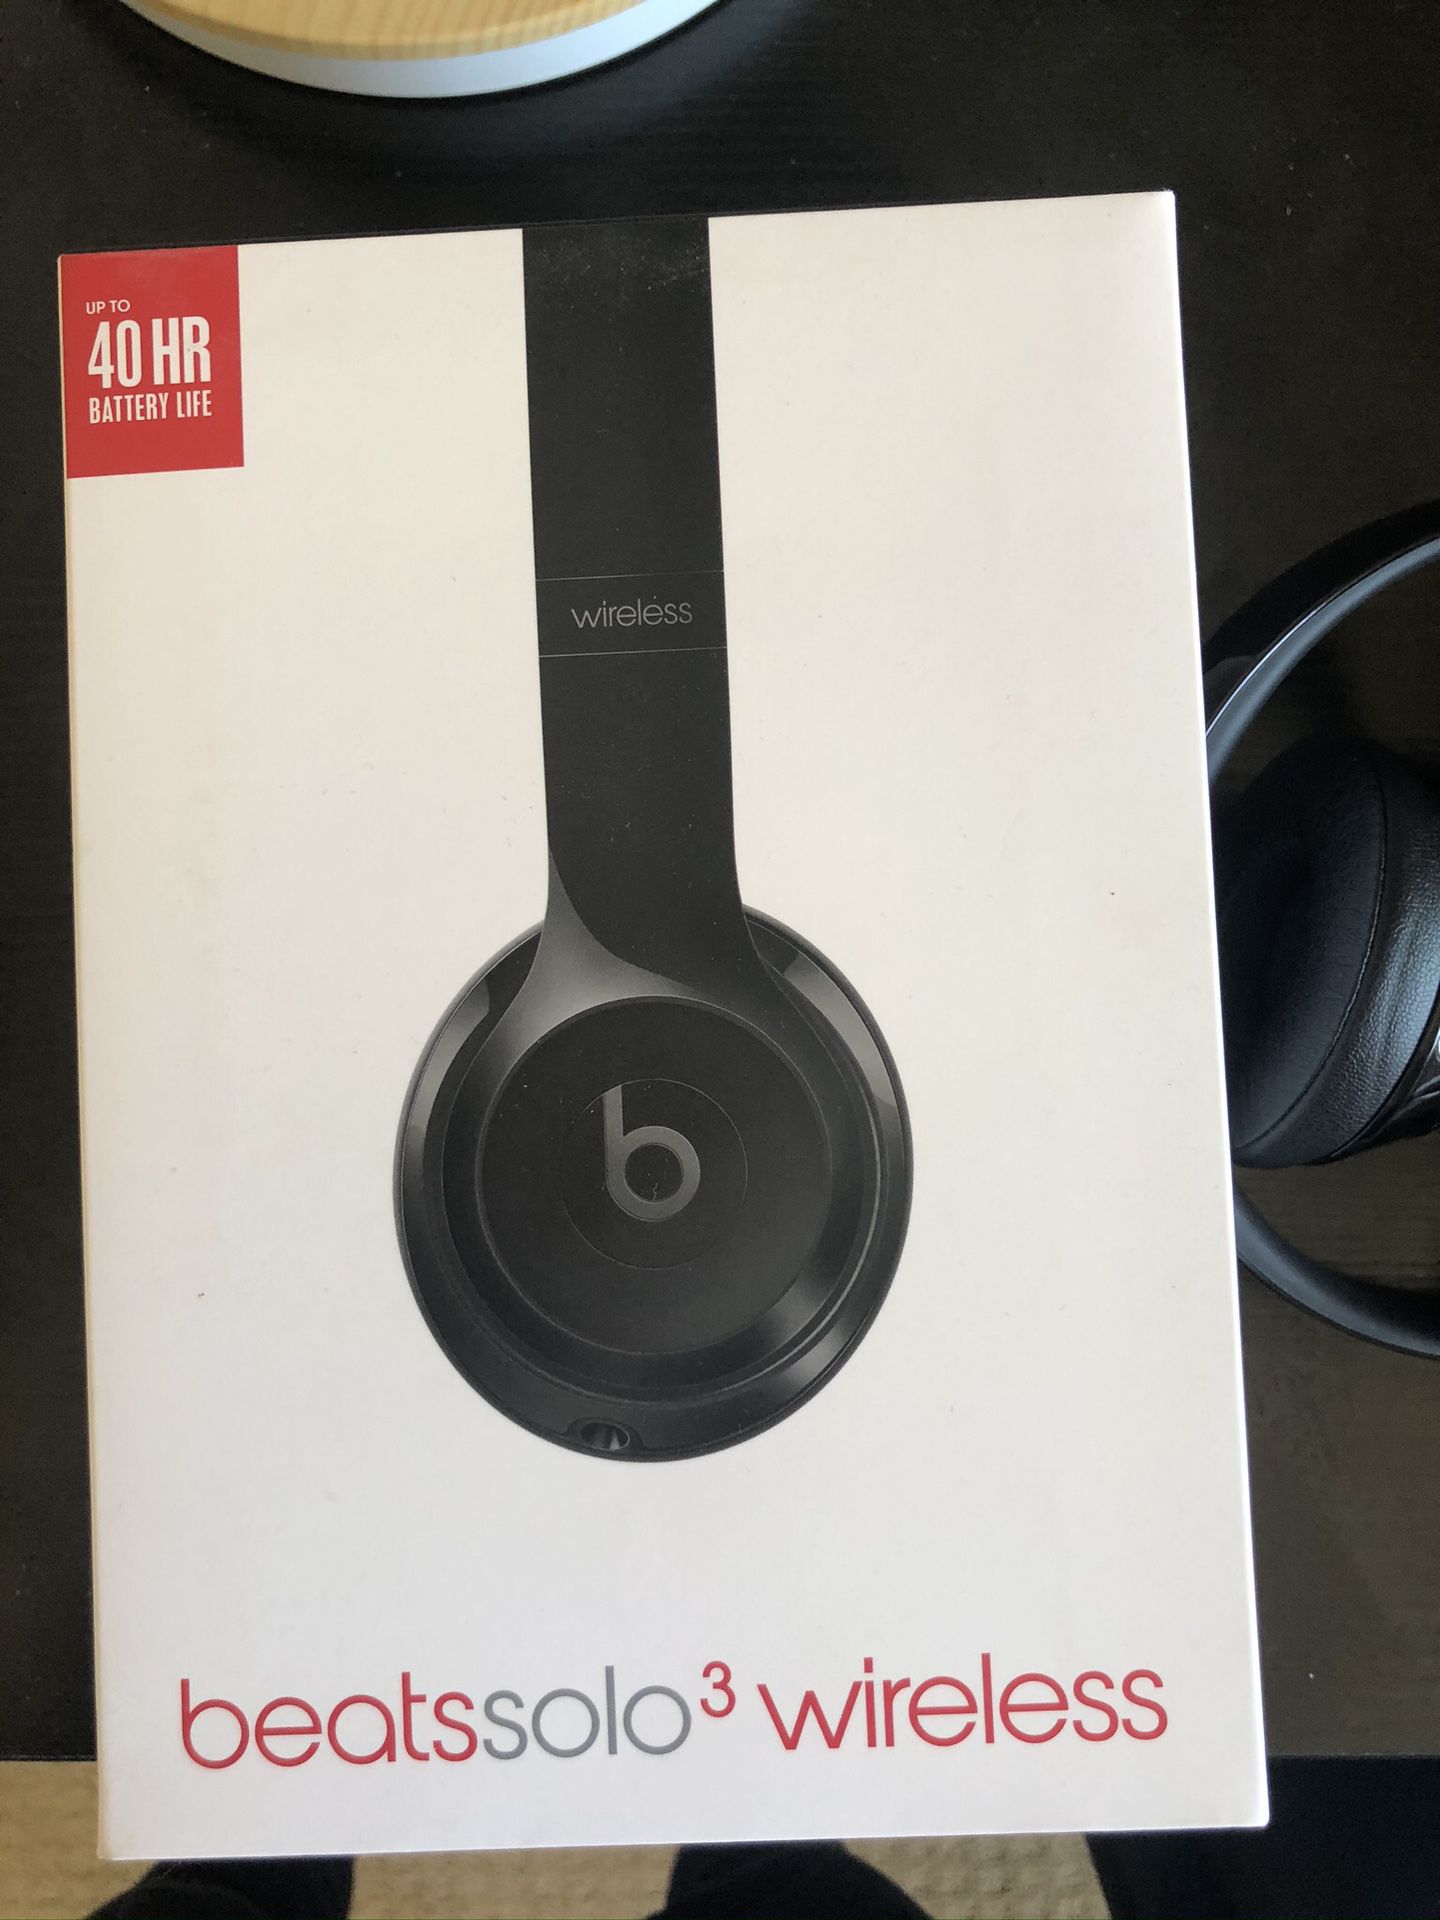 Beats solo wireless. Brand new. Worn once